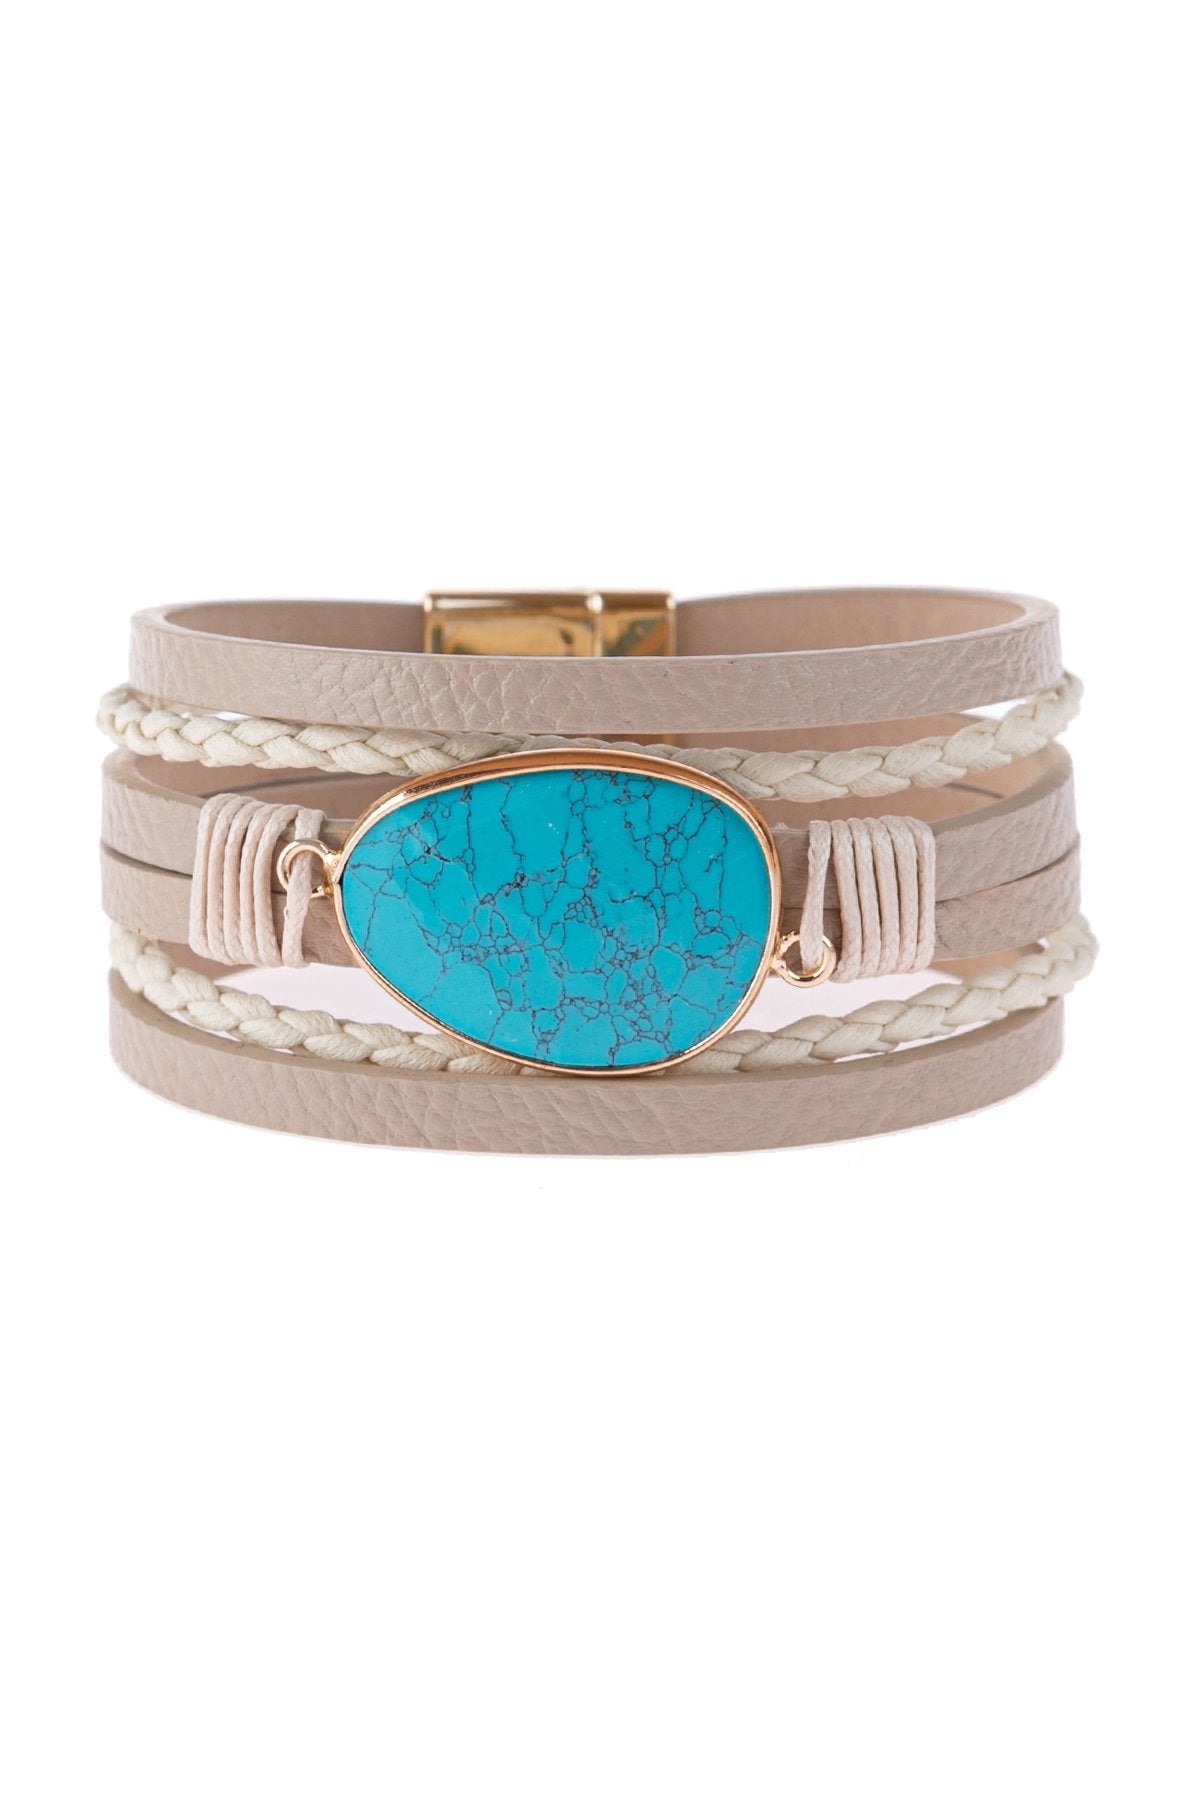 Hdb3124 - Multi Line Leather With Magnetic Lock Charm Bracelet